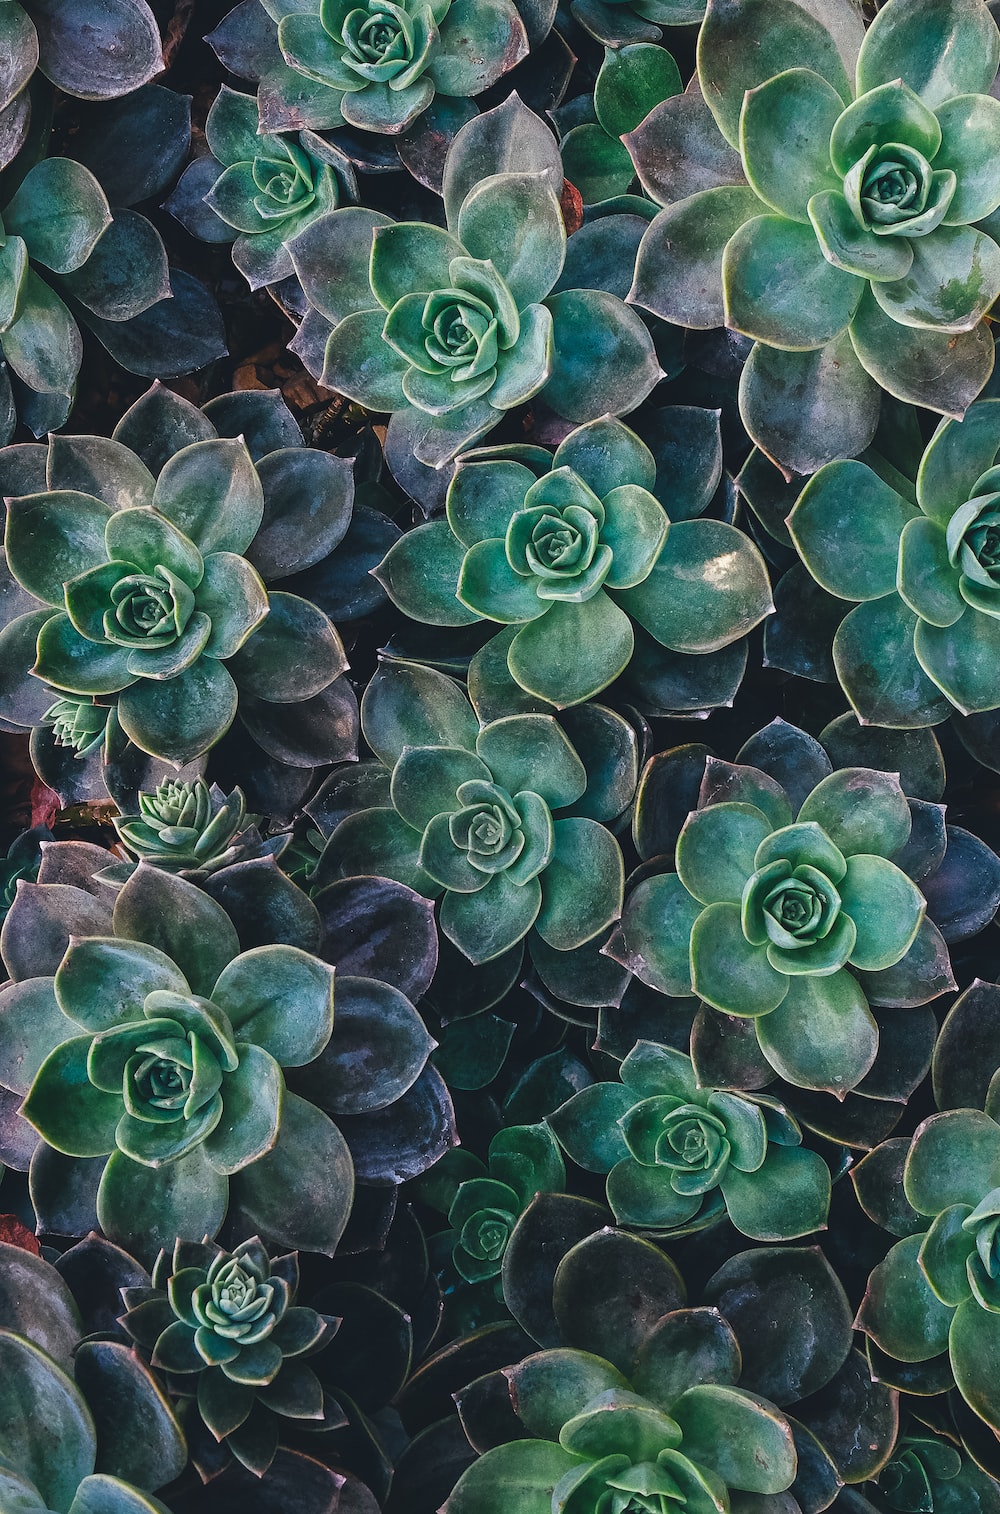 Succulents pictures hd download free images on